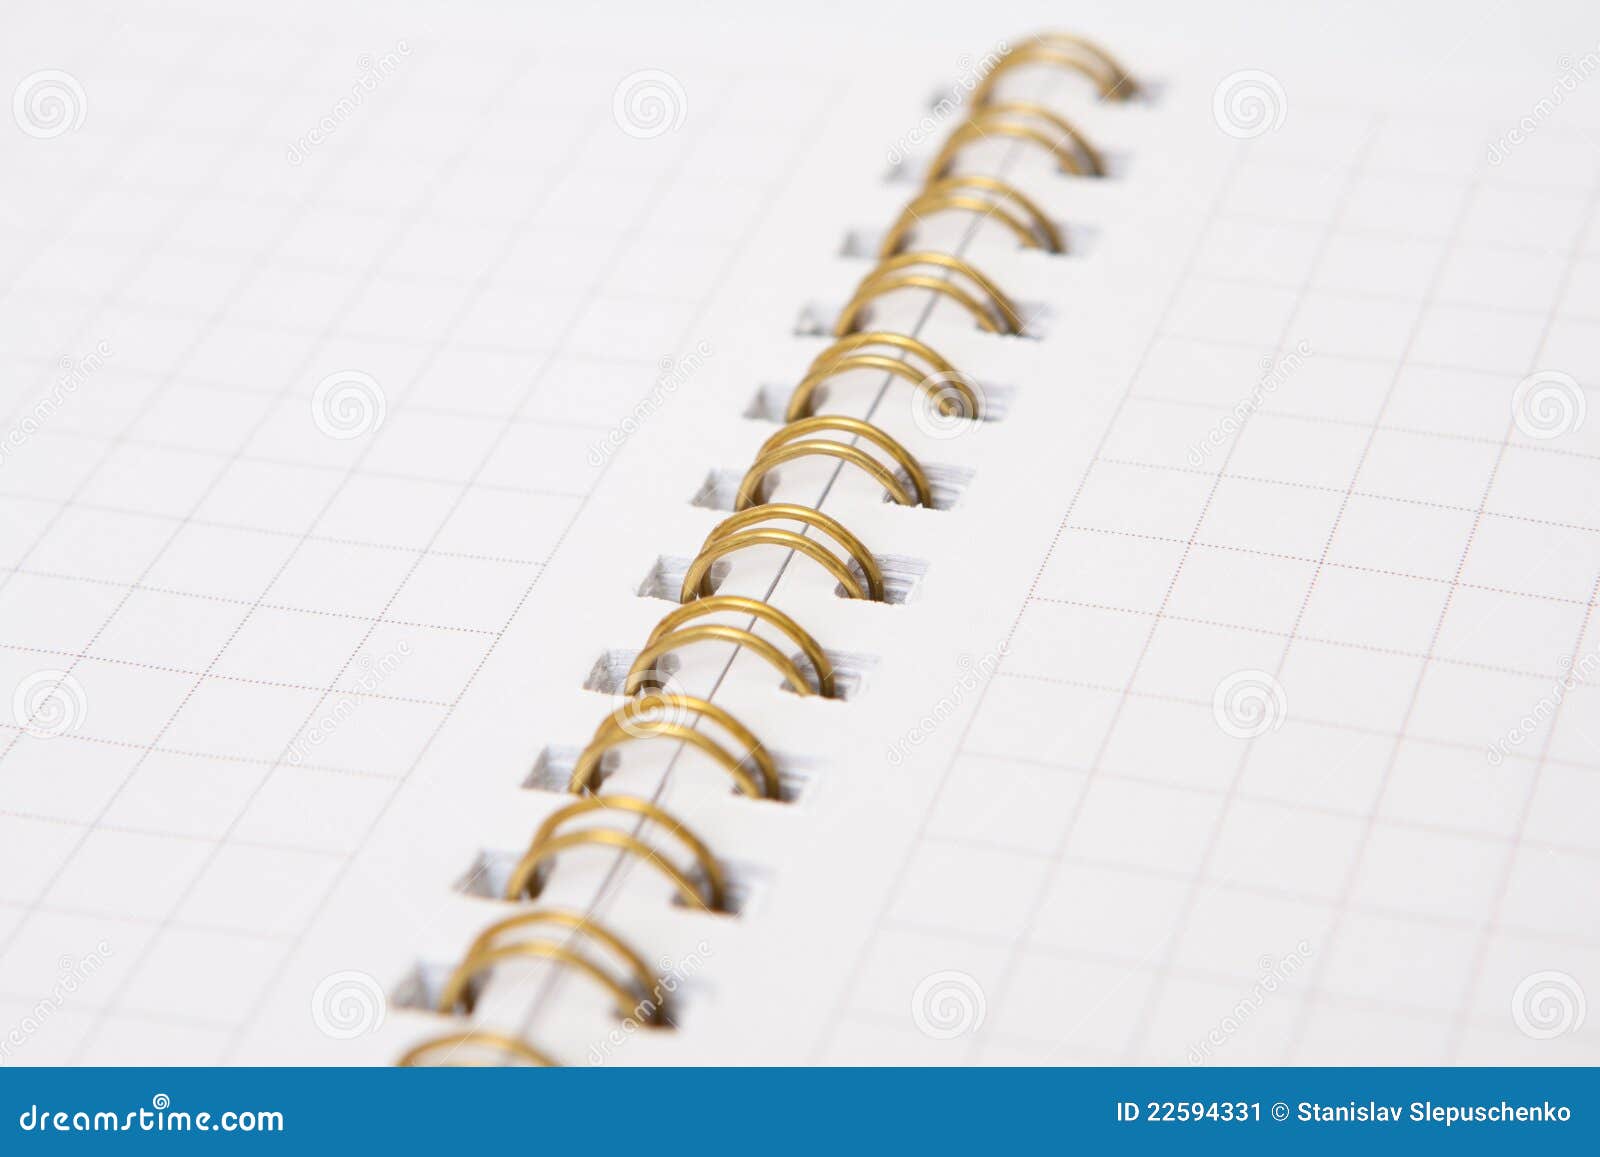 Spiral Notebook stock image. Image of blank, notebook - 22594331